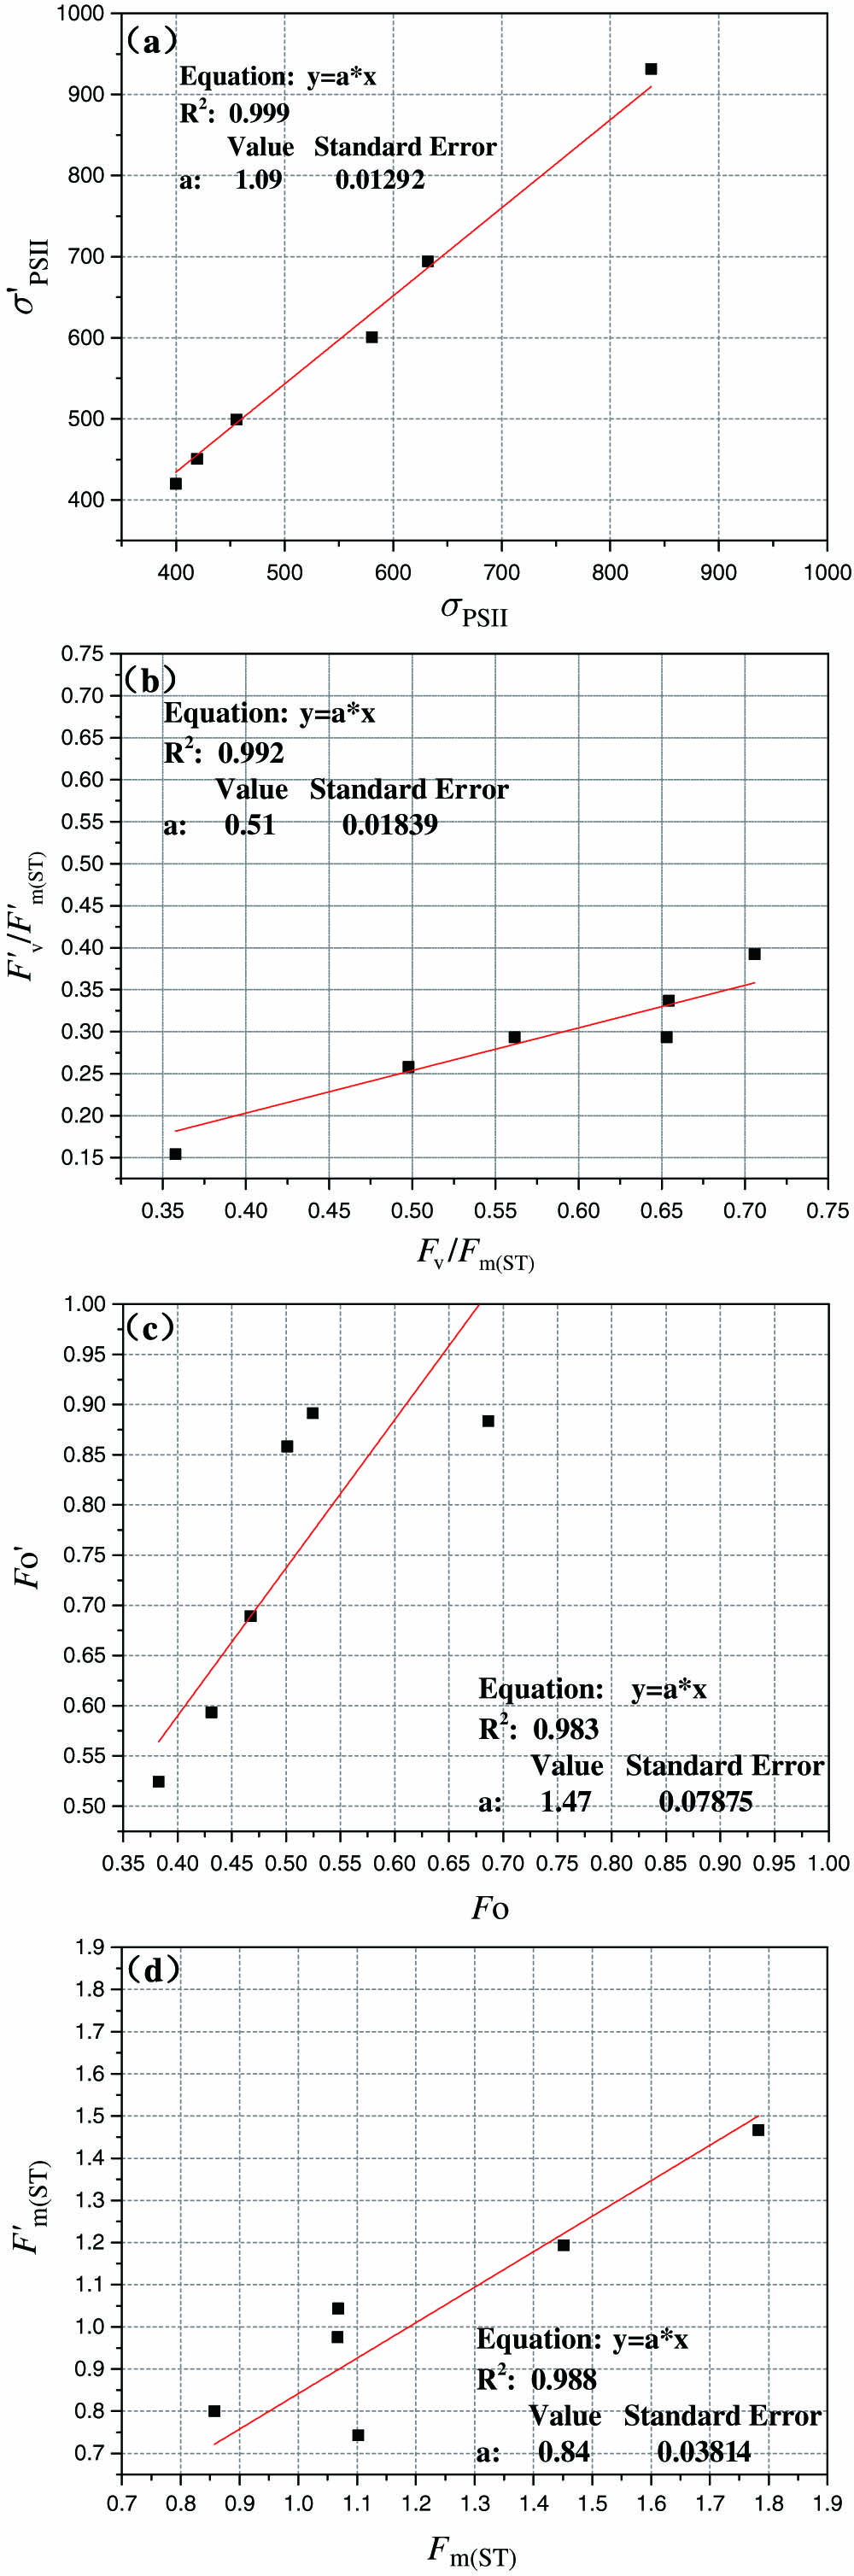 (a) PSII functional absorption cross section, (b) PSII photochemistry quantum yield, (c) minimal fluorescence yield, and (d) maximal fluorescence yield measured by the single-turnover protocol, respectively, under dark-adapted and light-adapted conditions.